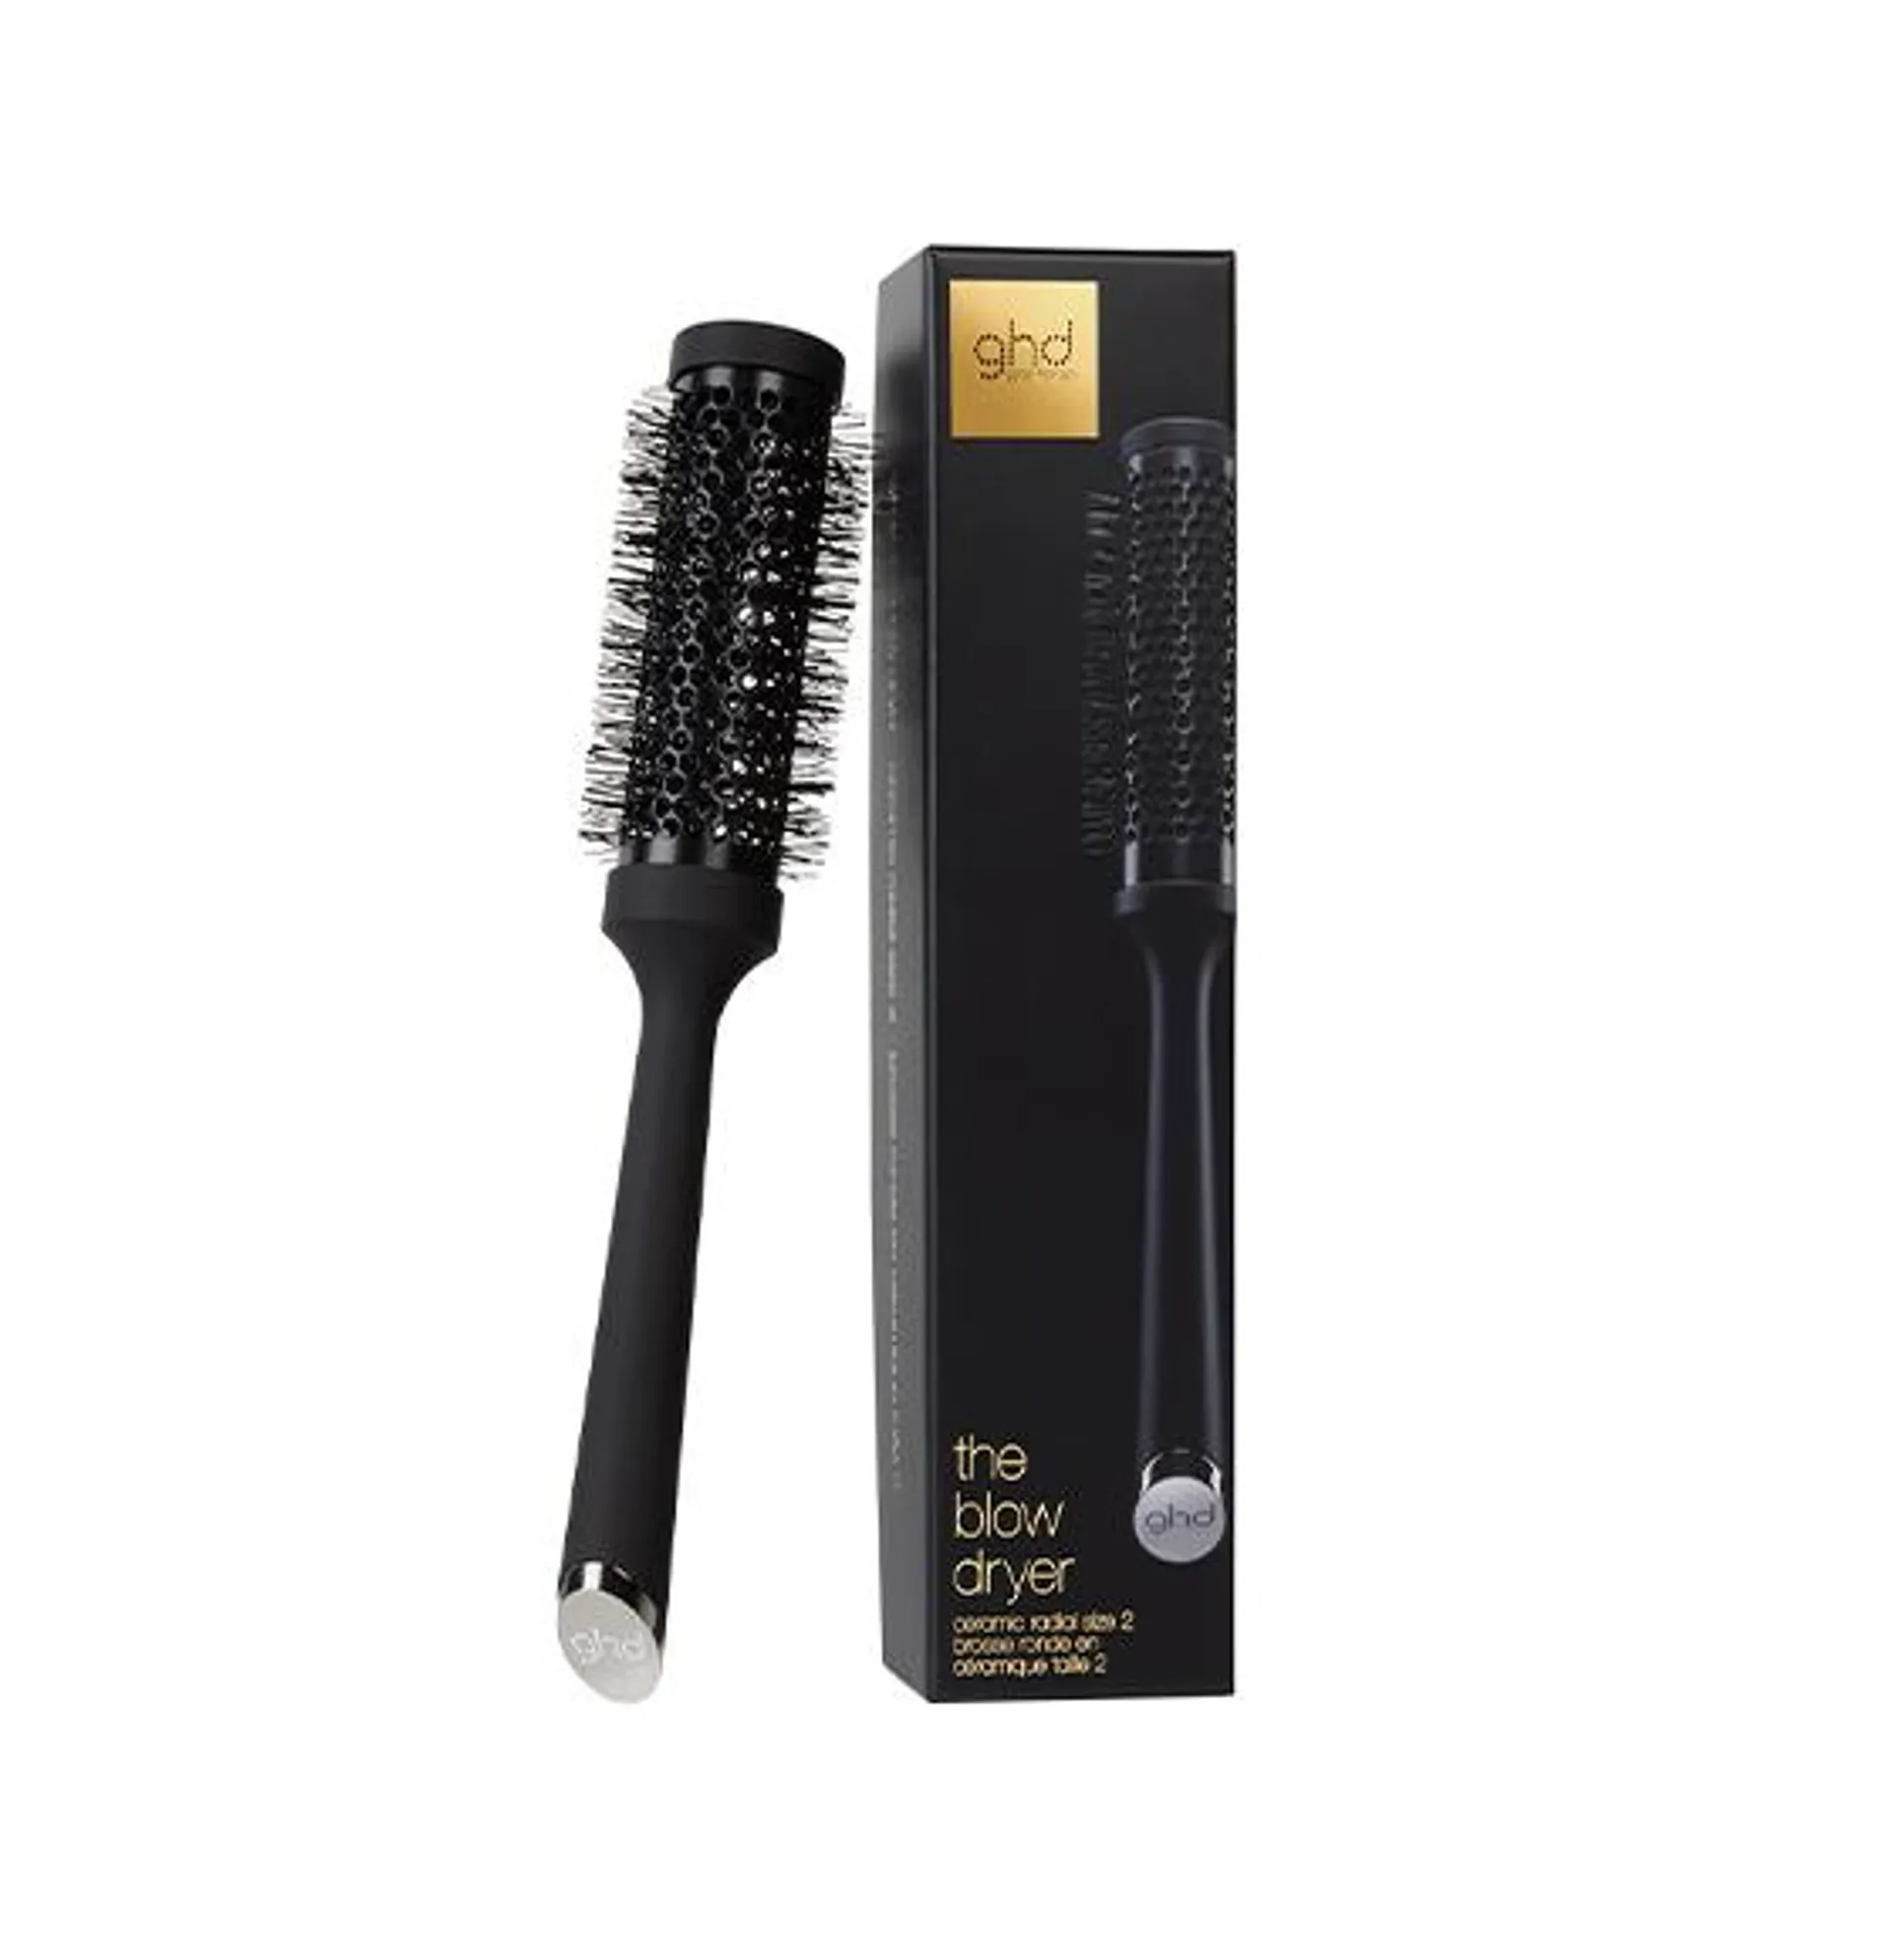 ghd The Blow Dryer Brush Size 2